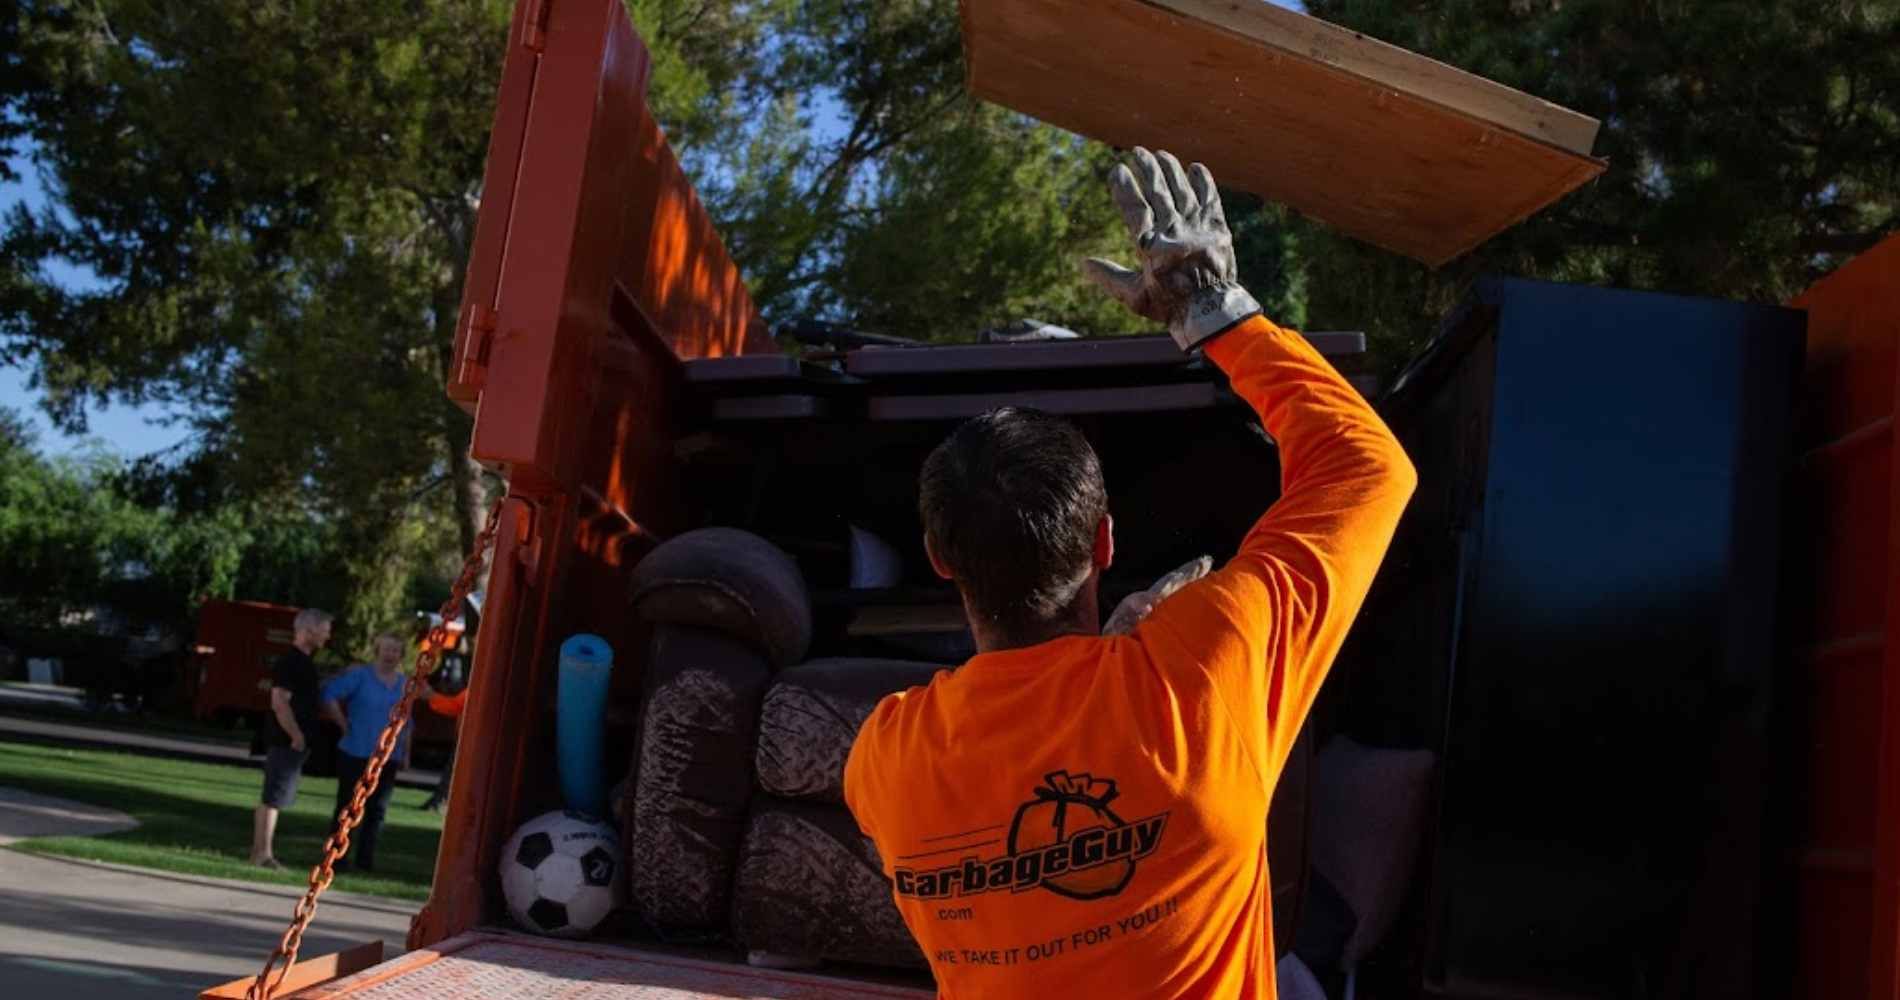 #1 for Eviction Cleanout in Chandler, AZ with Over 1200 5-Star Reviews!